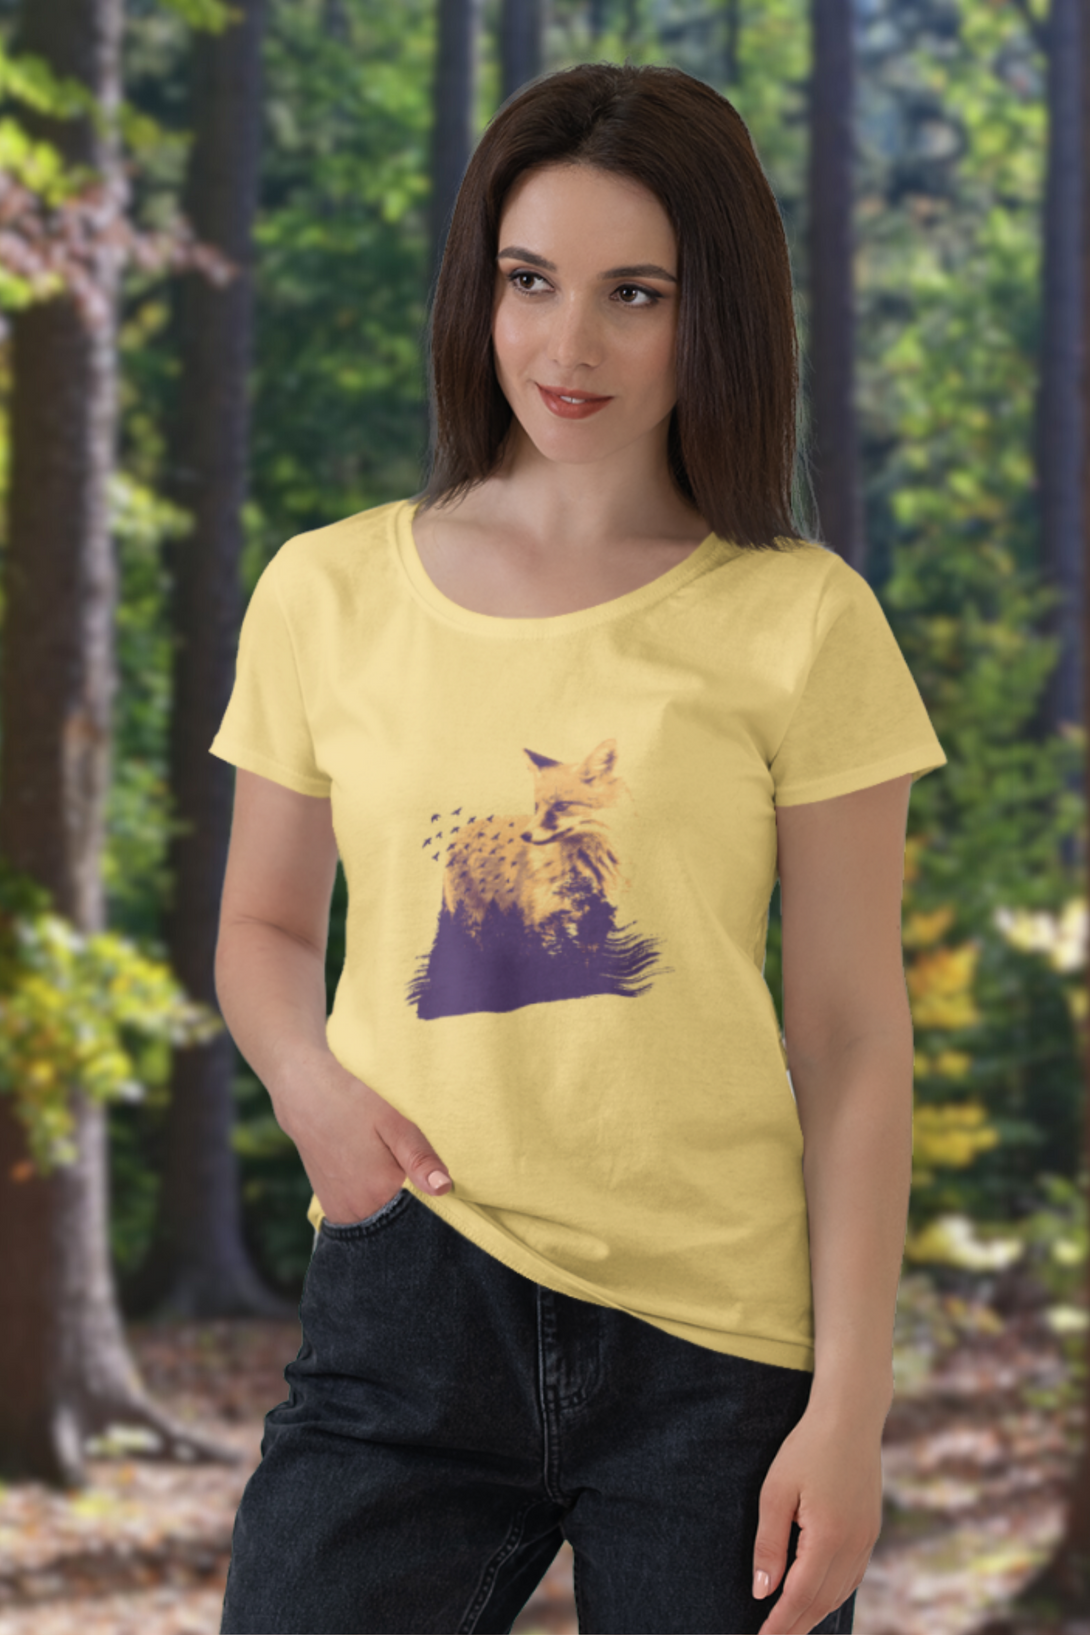 Forest Fox Printed Scoop Neck T-Shirt For Women - WowWaves - 7